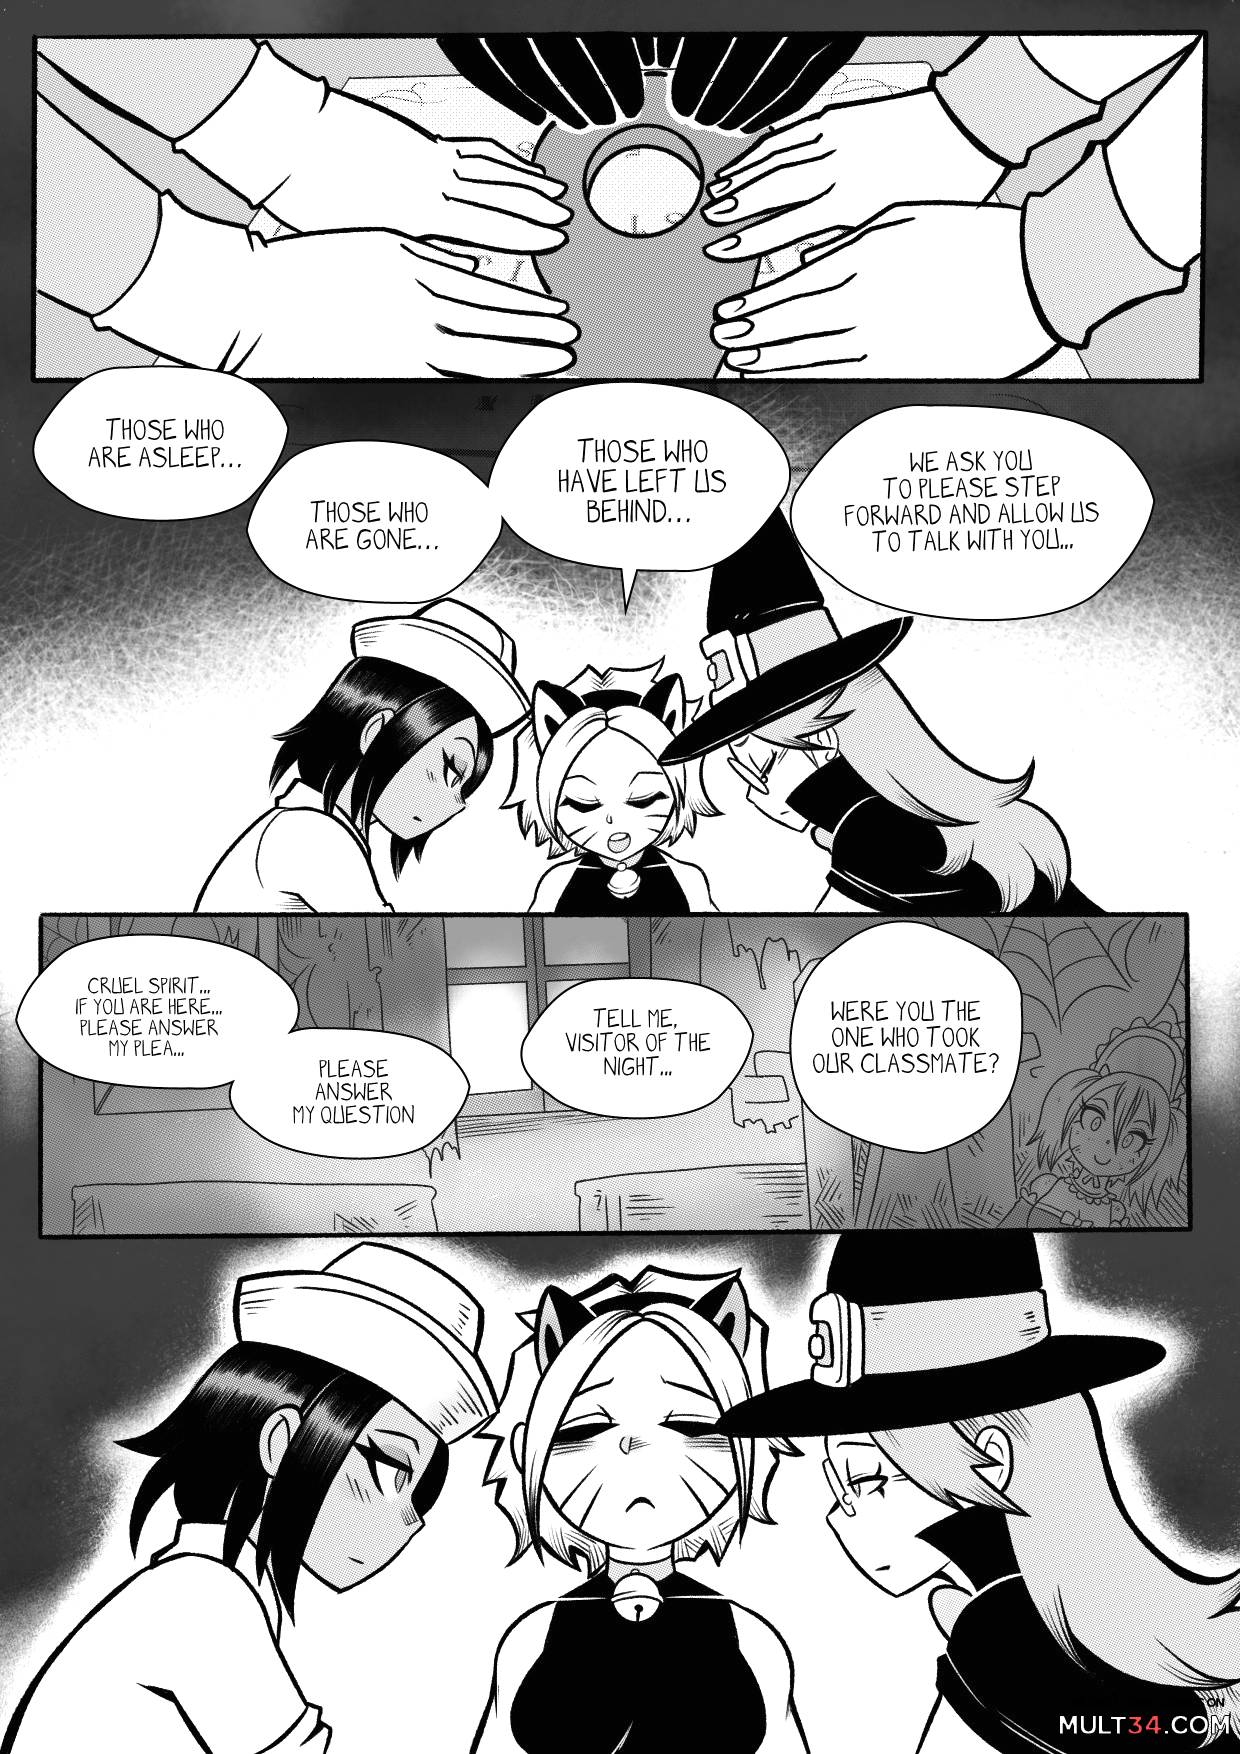 Hereafter - Halloween page 5